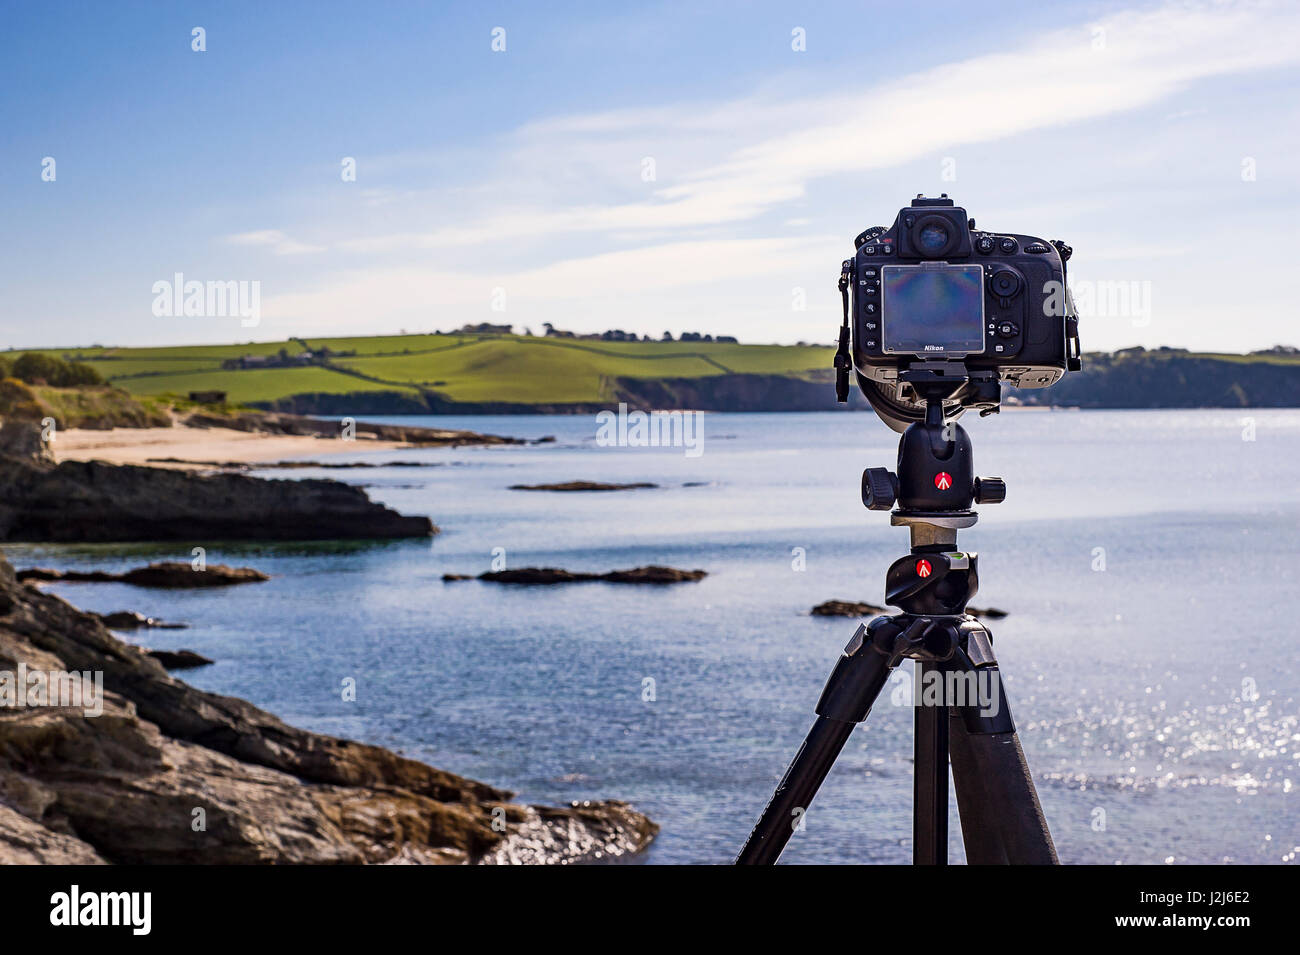 Nikon D800 and Manfrotto Tripod symbiotically working for great landscape photography. Stock Photo